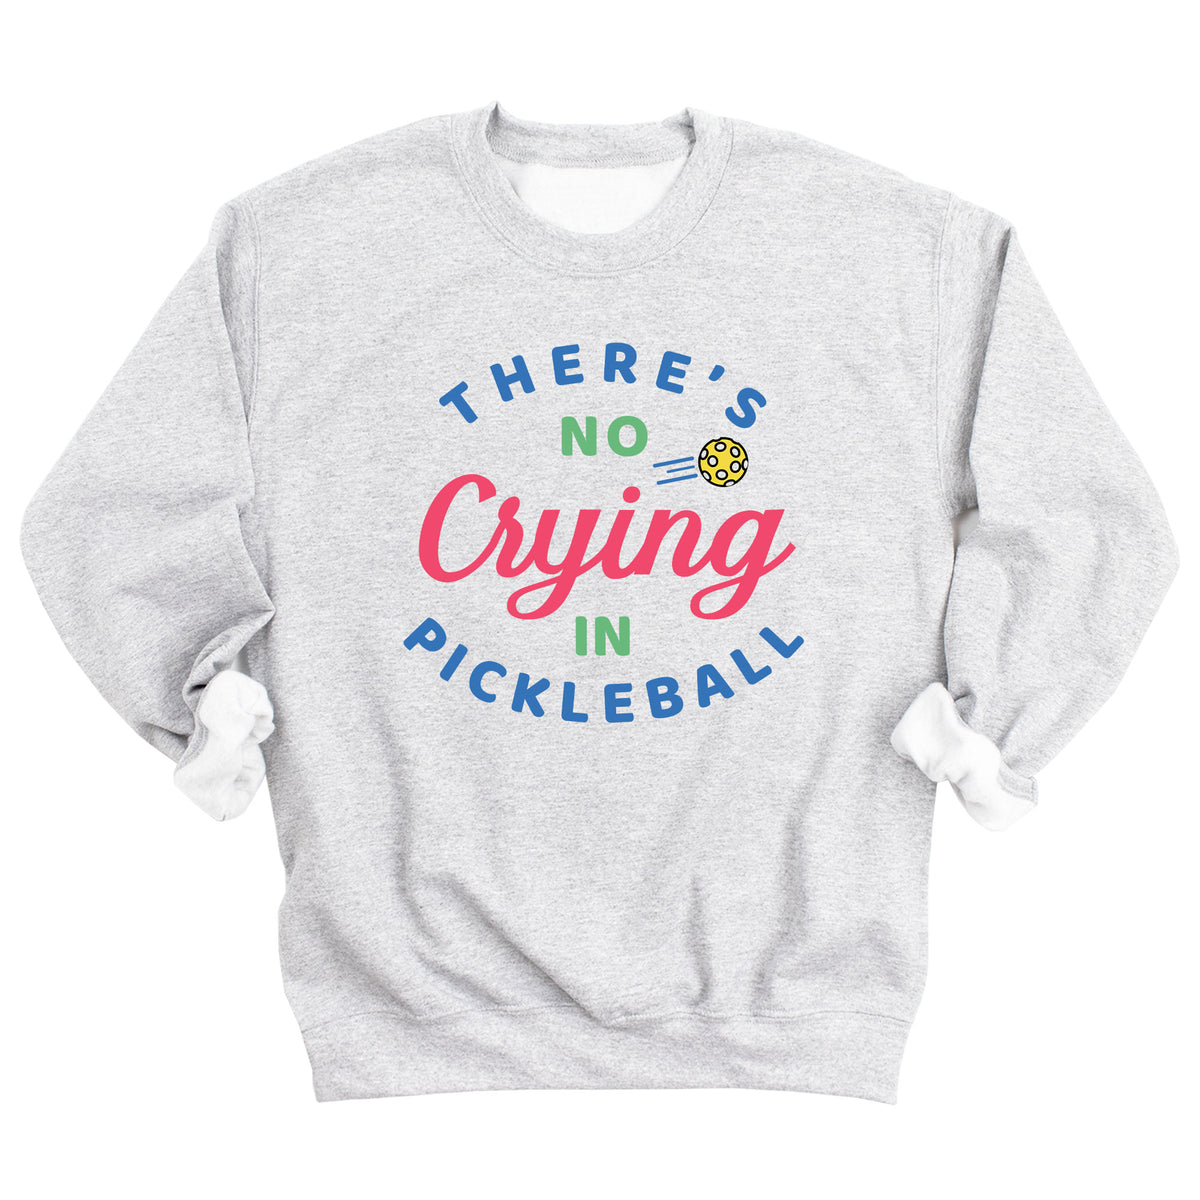 There's No Crying in Pickleball Sweatshirt